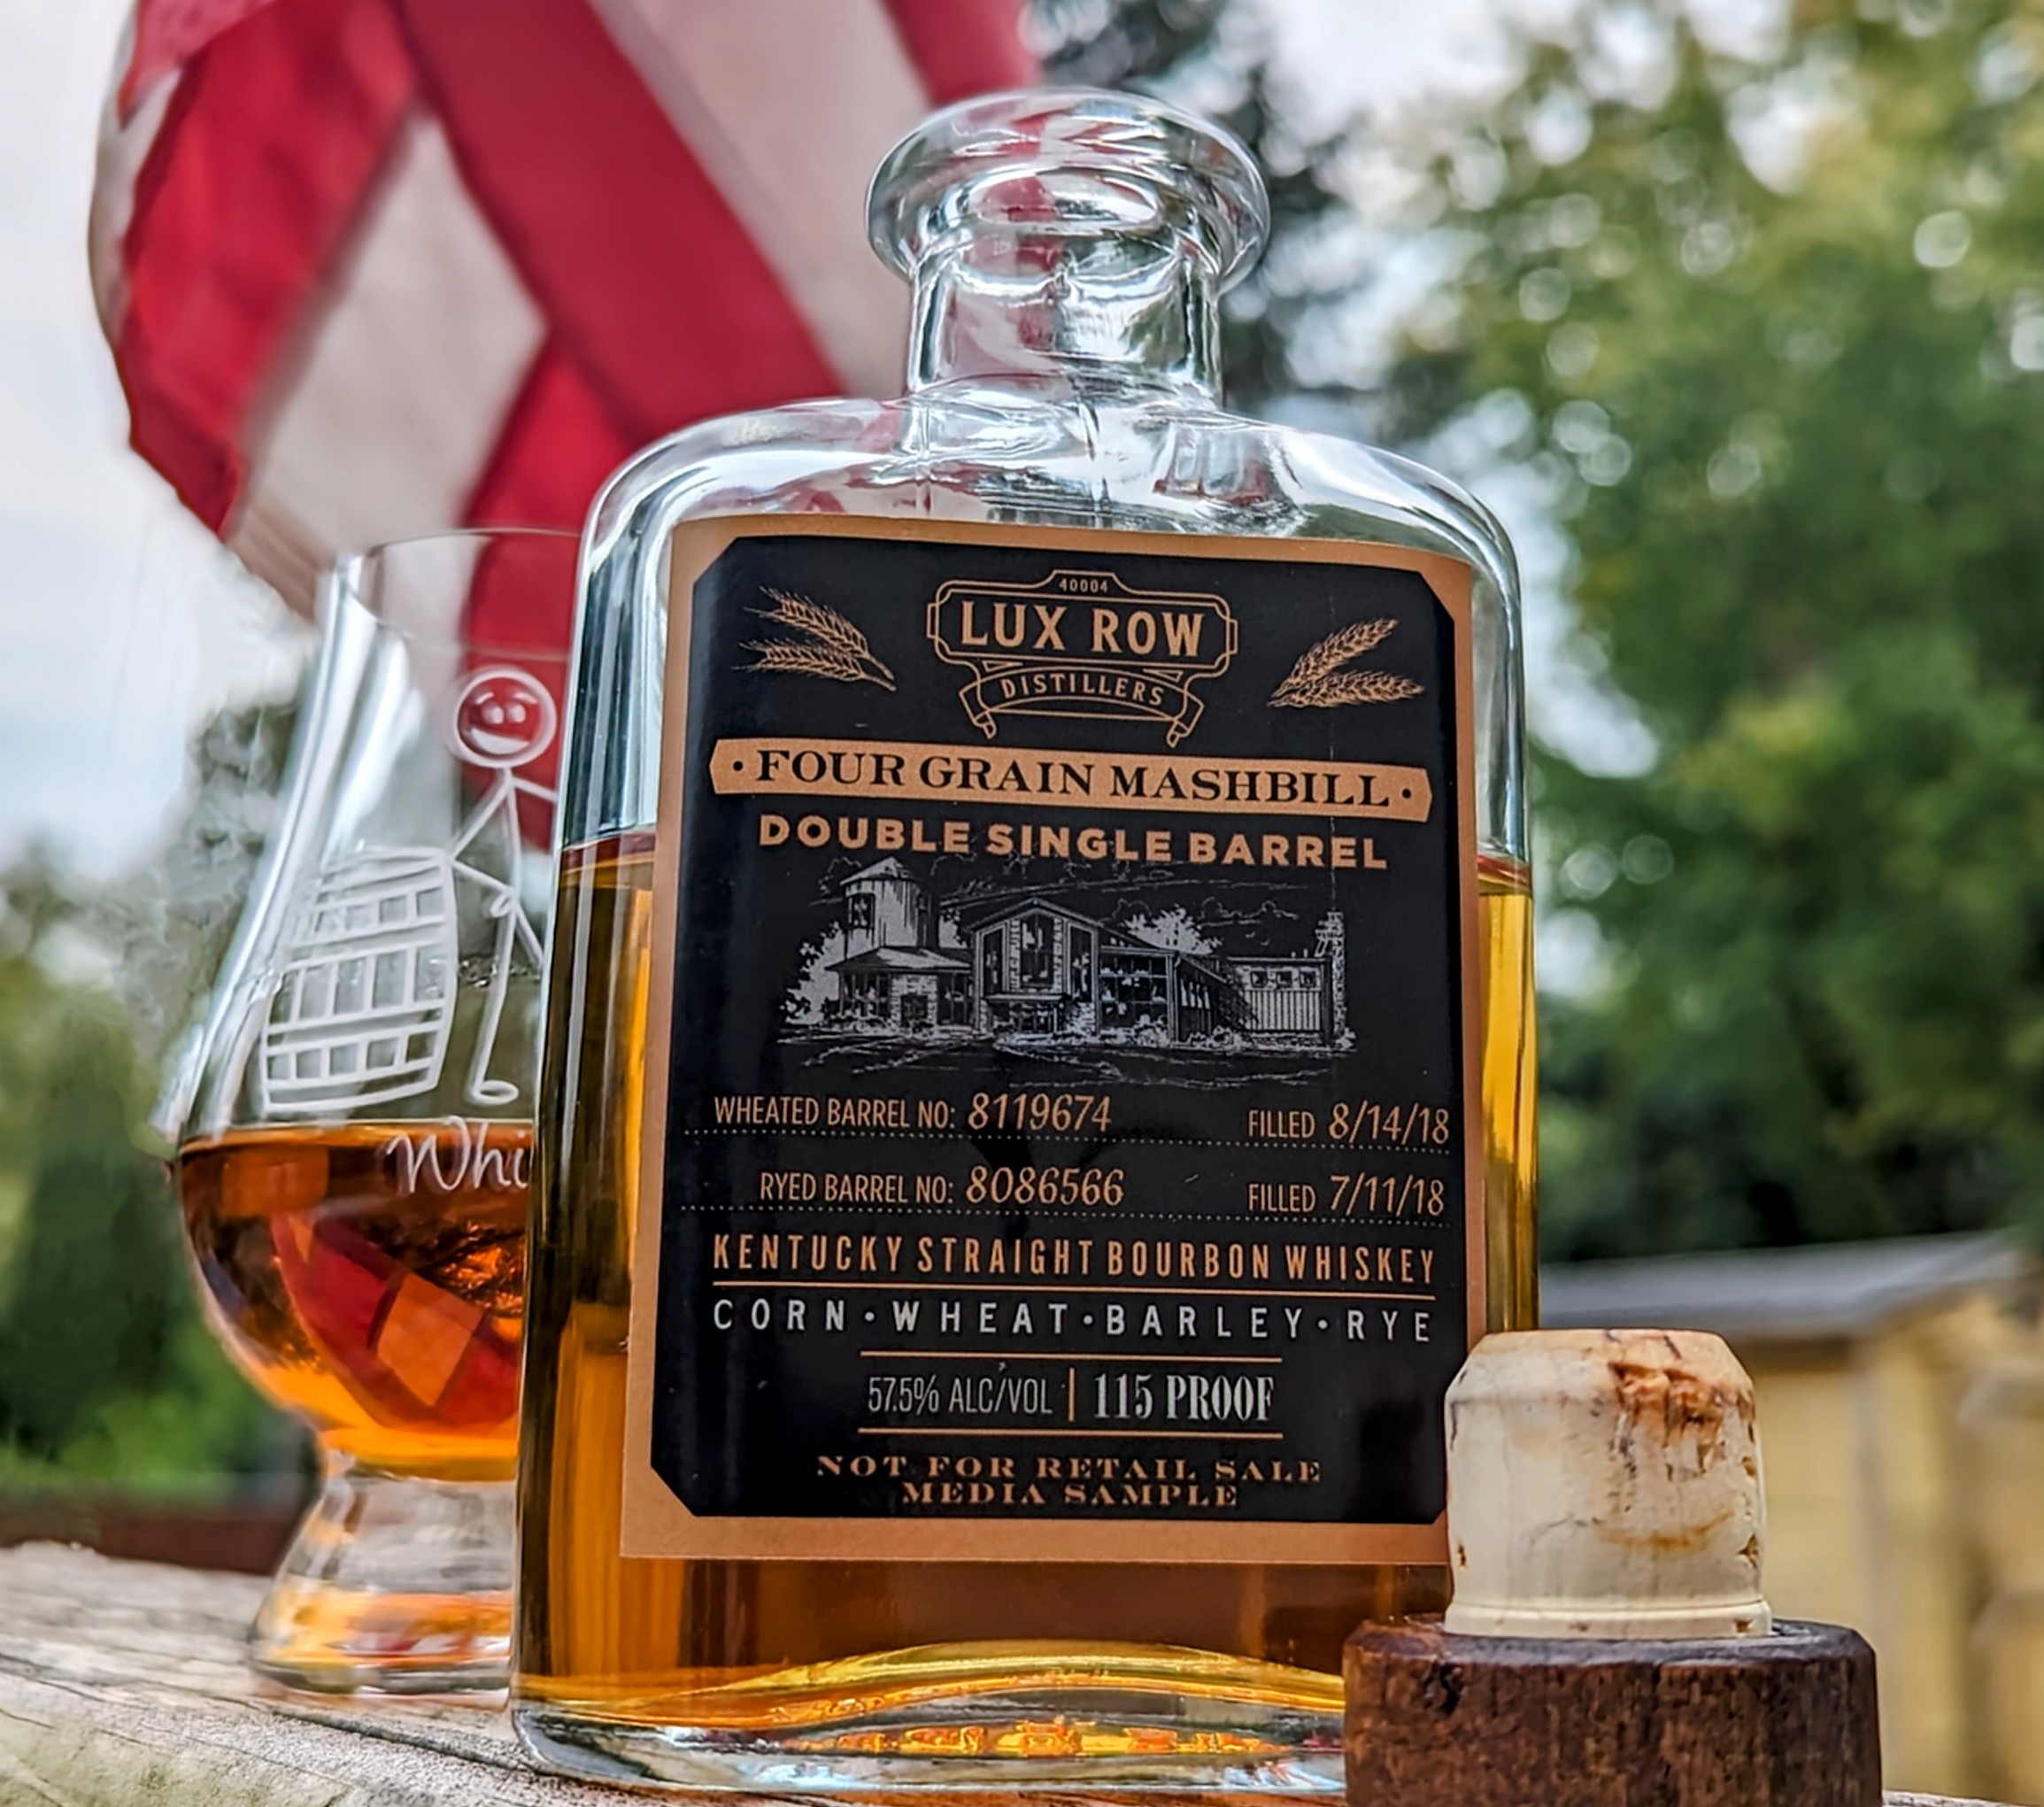 What Grain is Bourbon Made From?